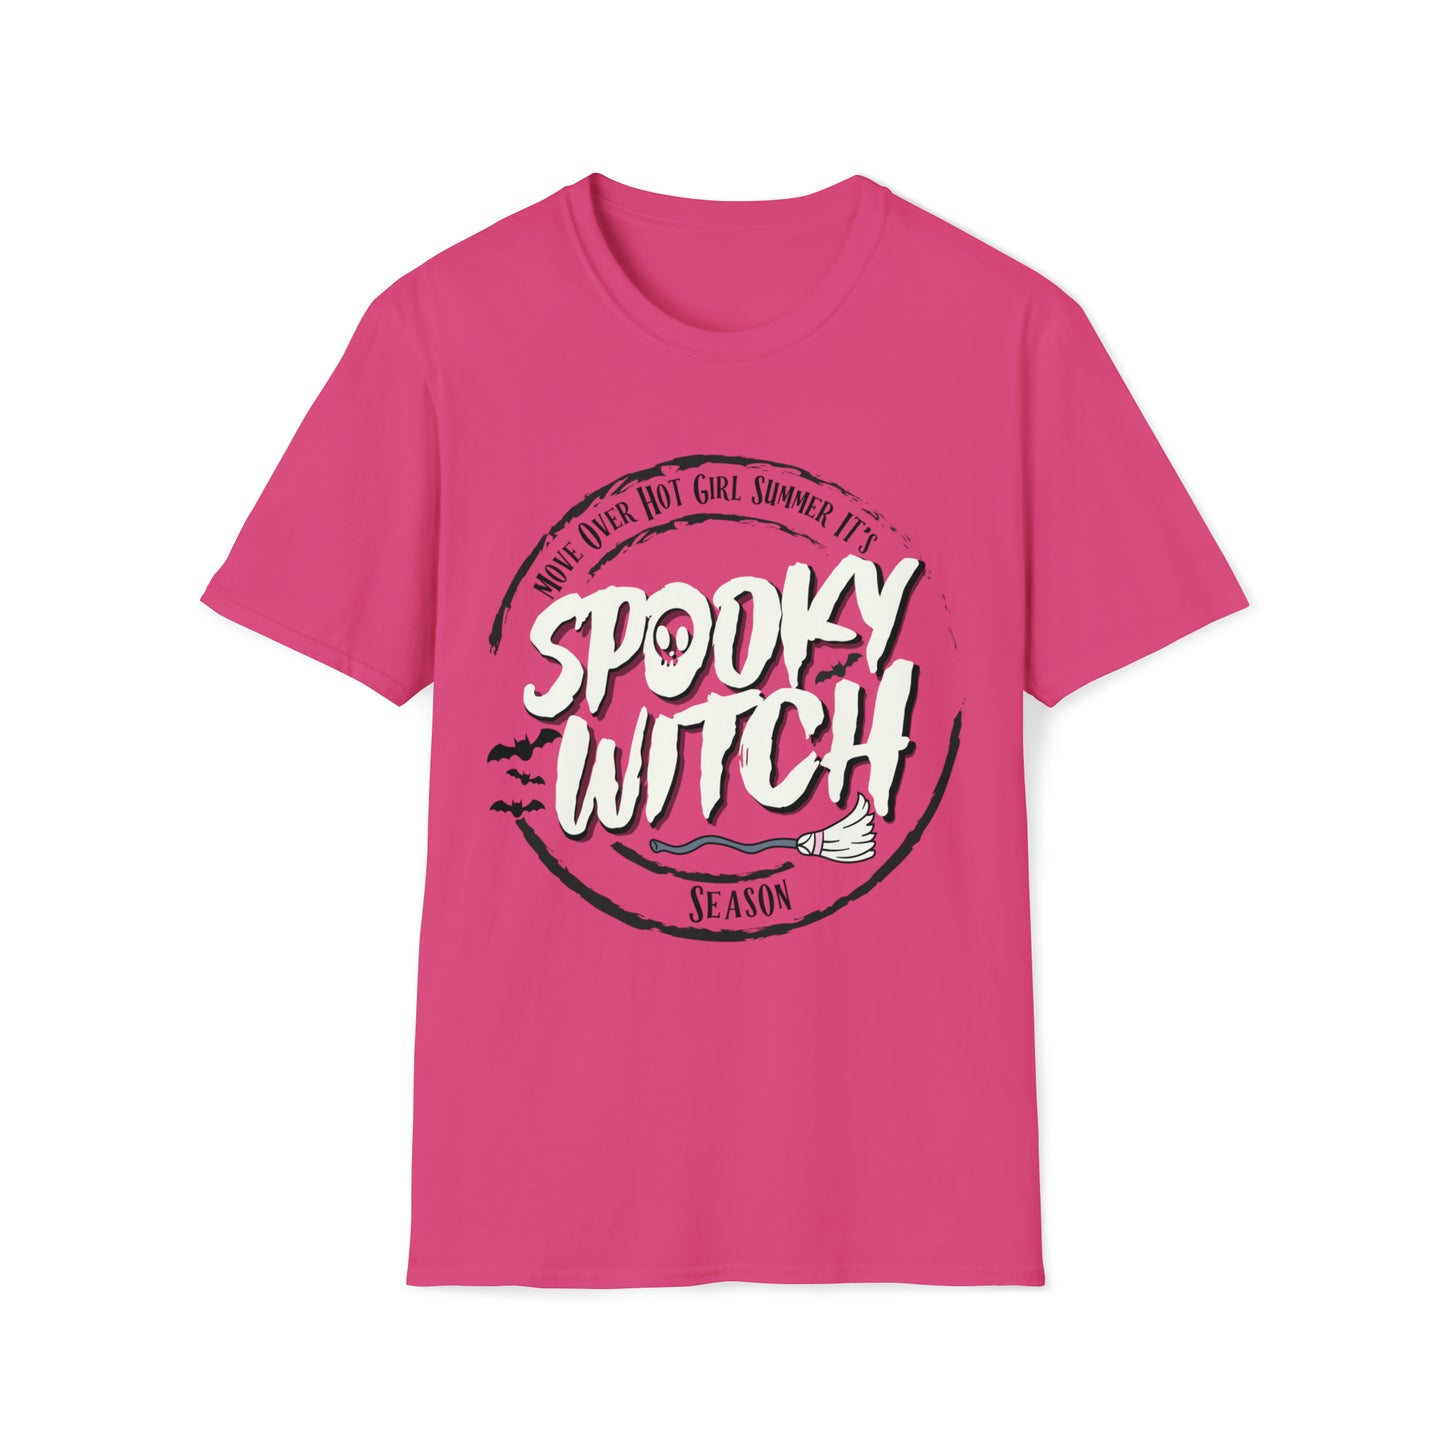 Spooky Witch Season - Unisex Softstyle T-Shirt